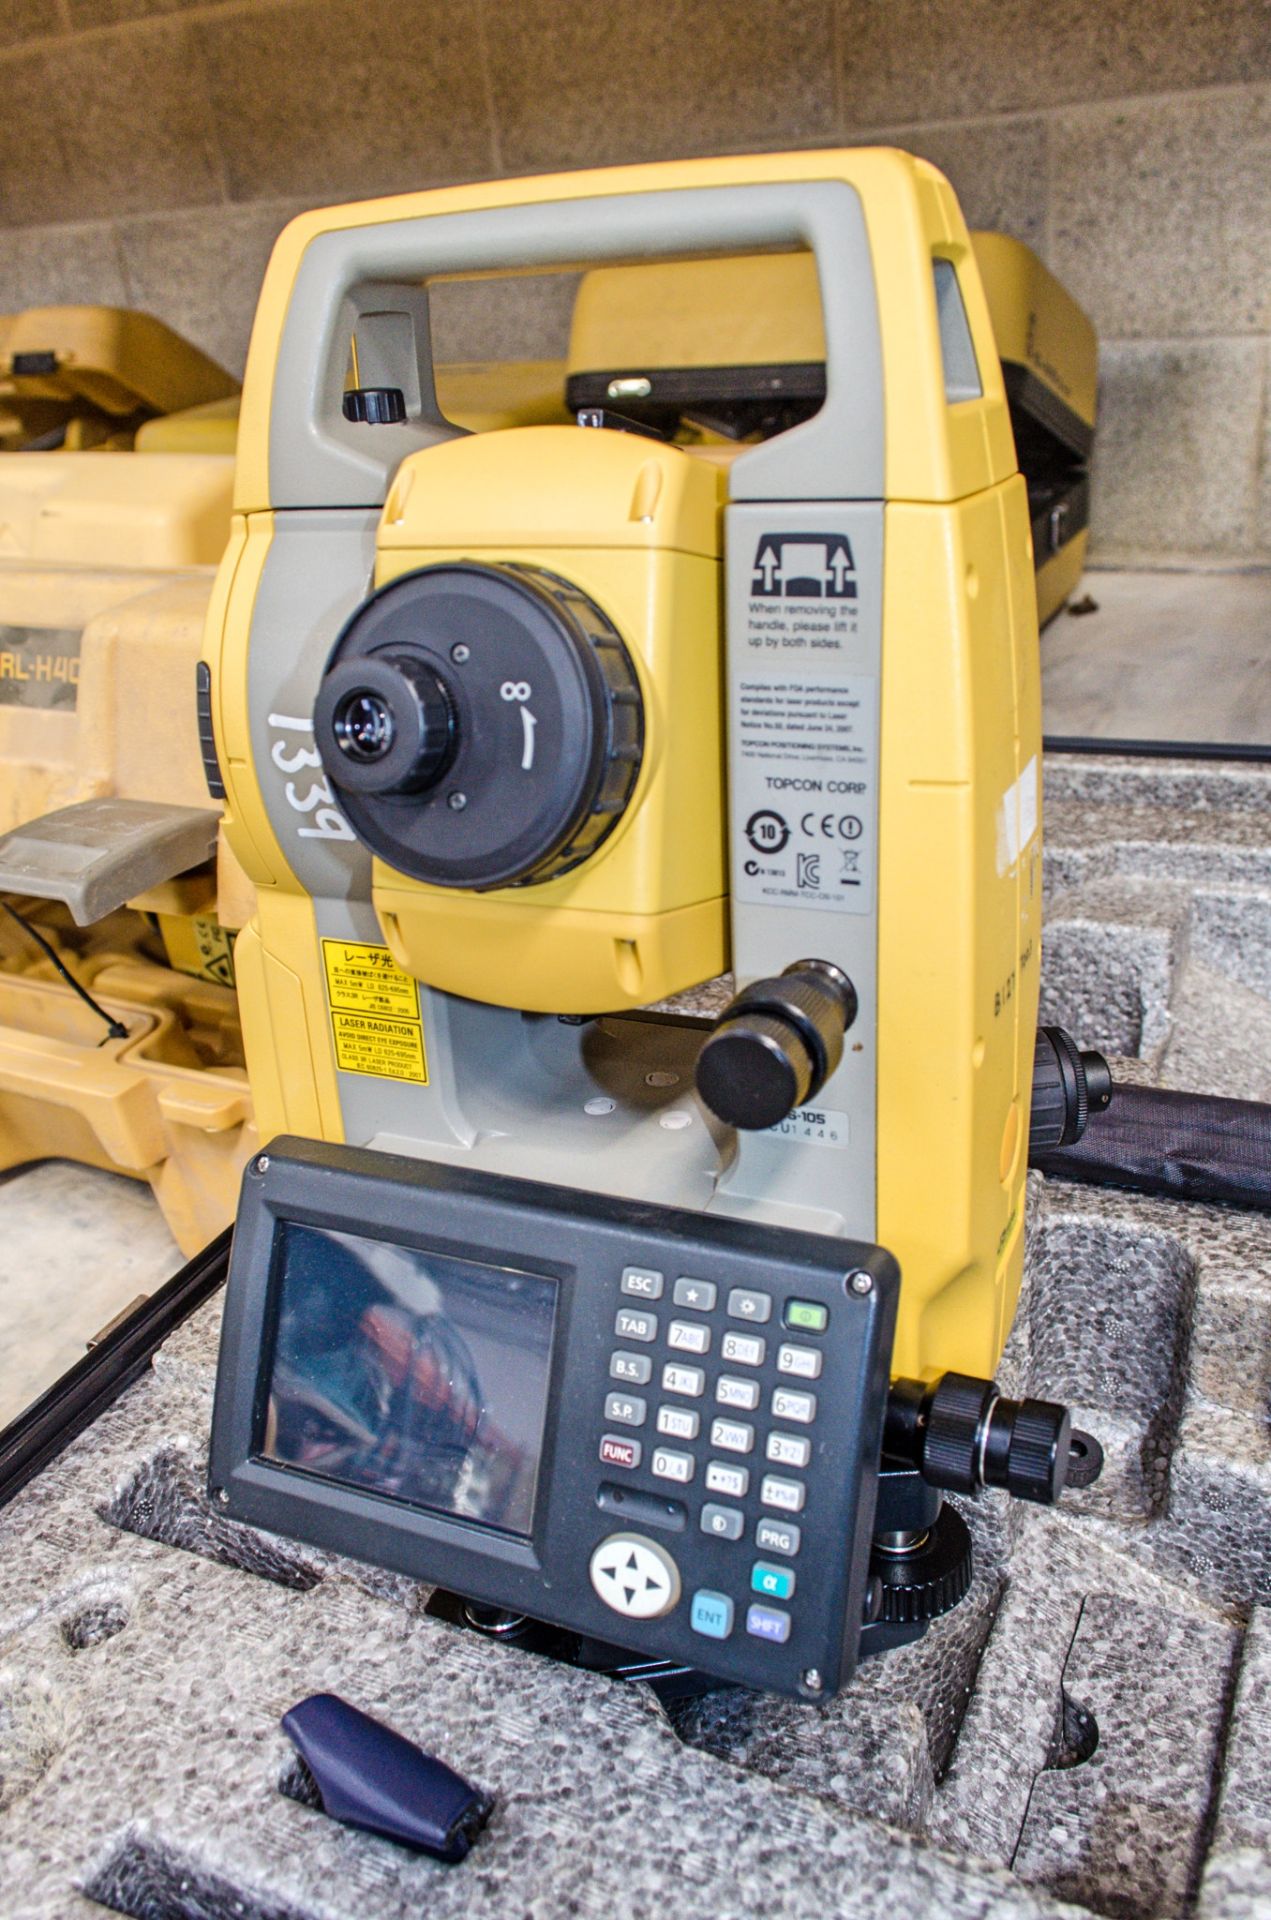 Topcon OS-105 total station c/w carry case - Image 2 of 3